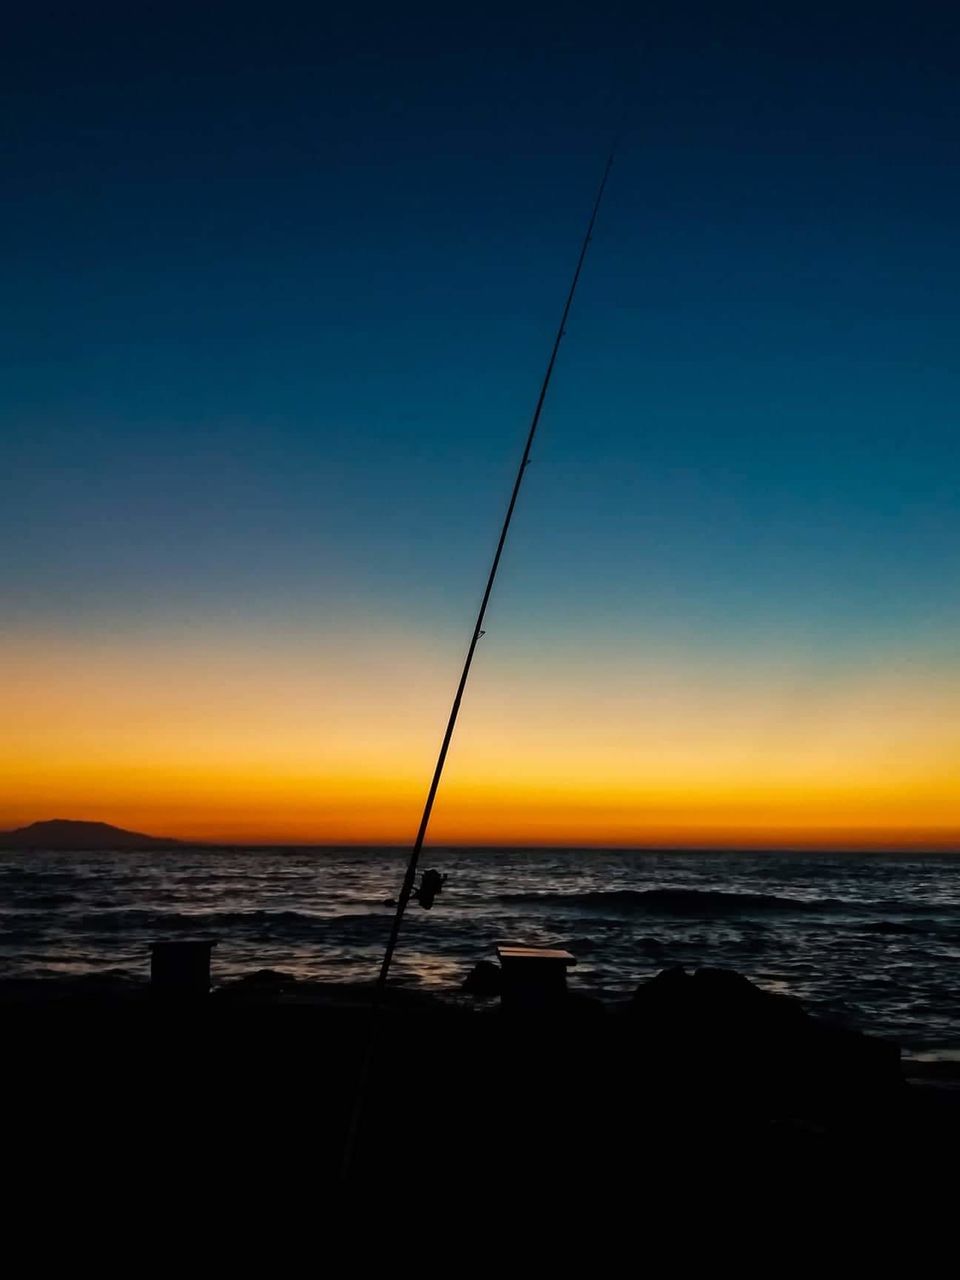 sky, sea, water, horizon, scenics - nature, sunset, horizon over water, beauty in nature, tranquility, tranquil scene, silhouette, nature, clear sky, no people, land, blue, fishing rod, copy space, beach, outdoors